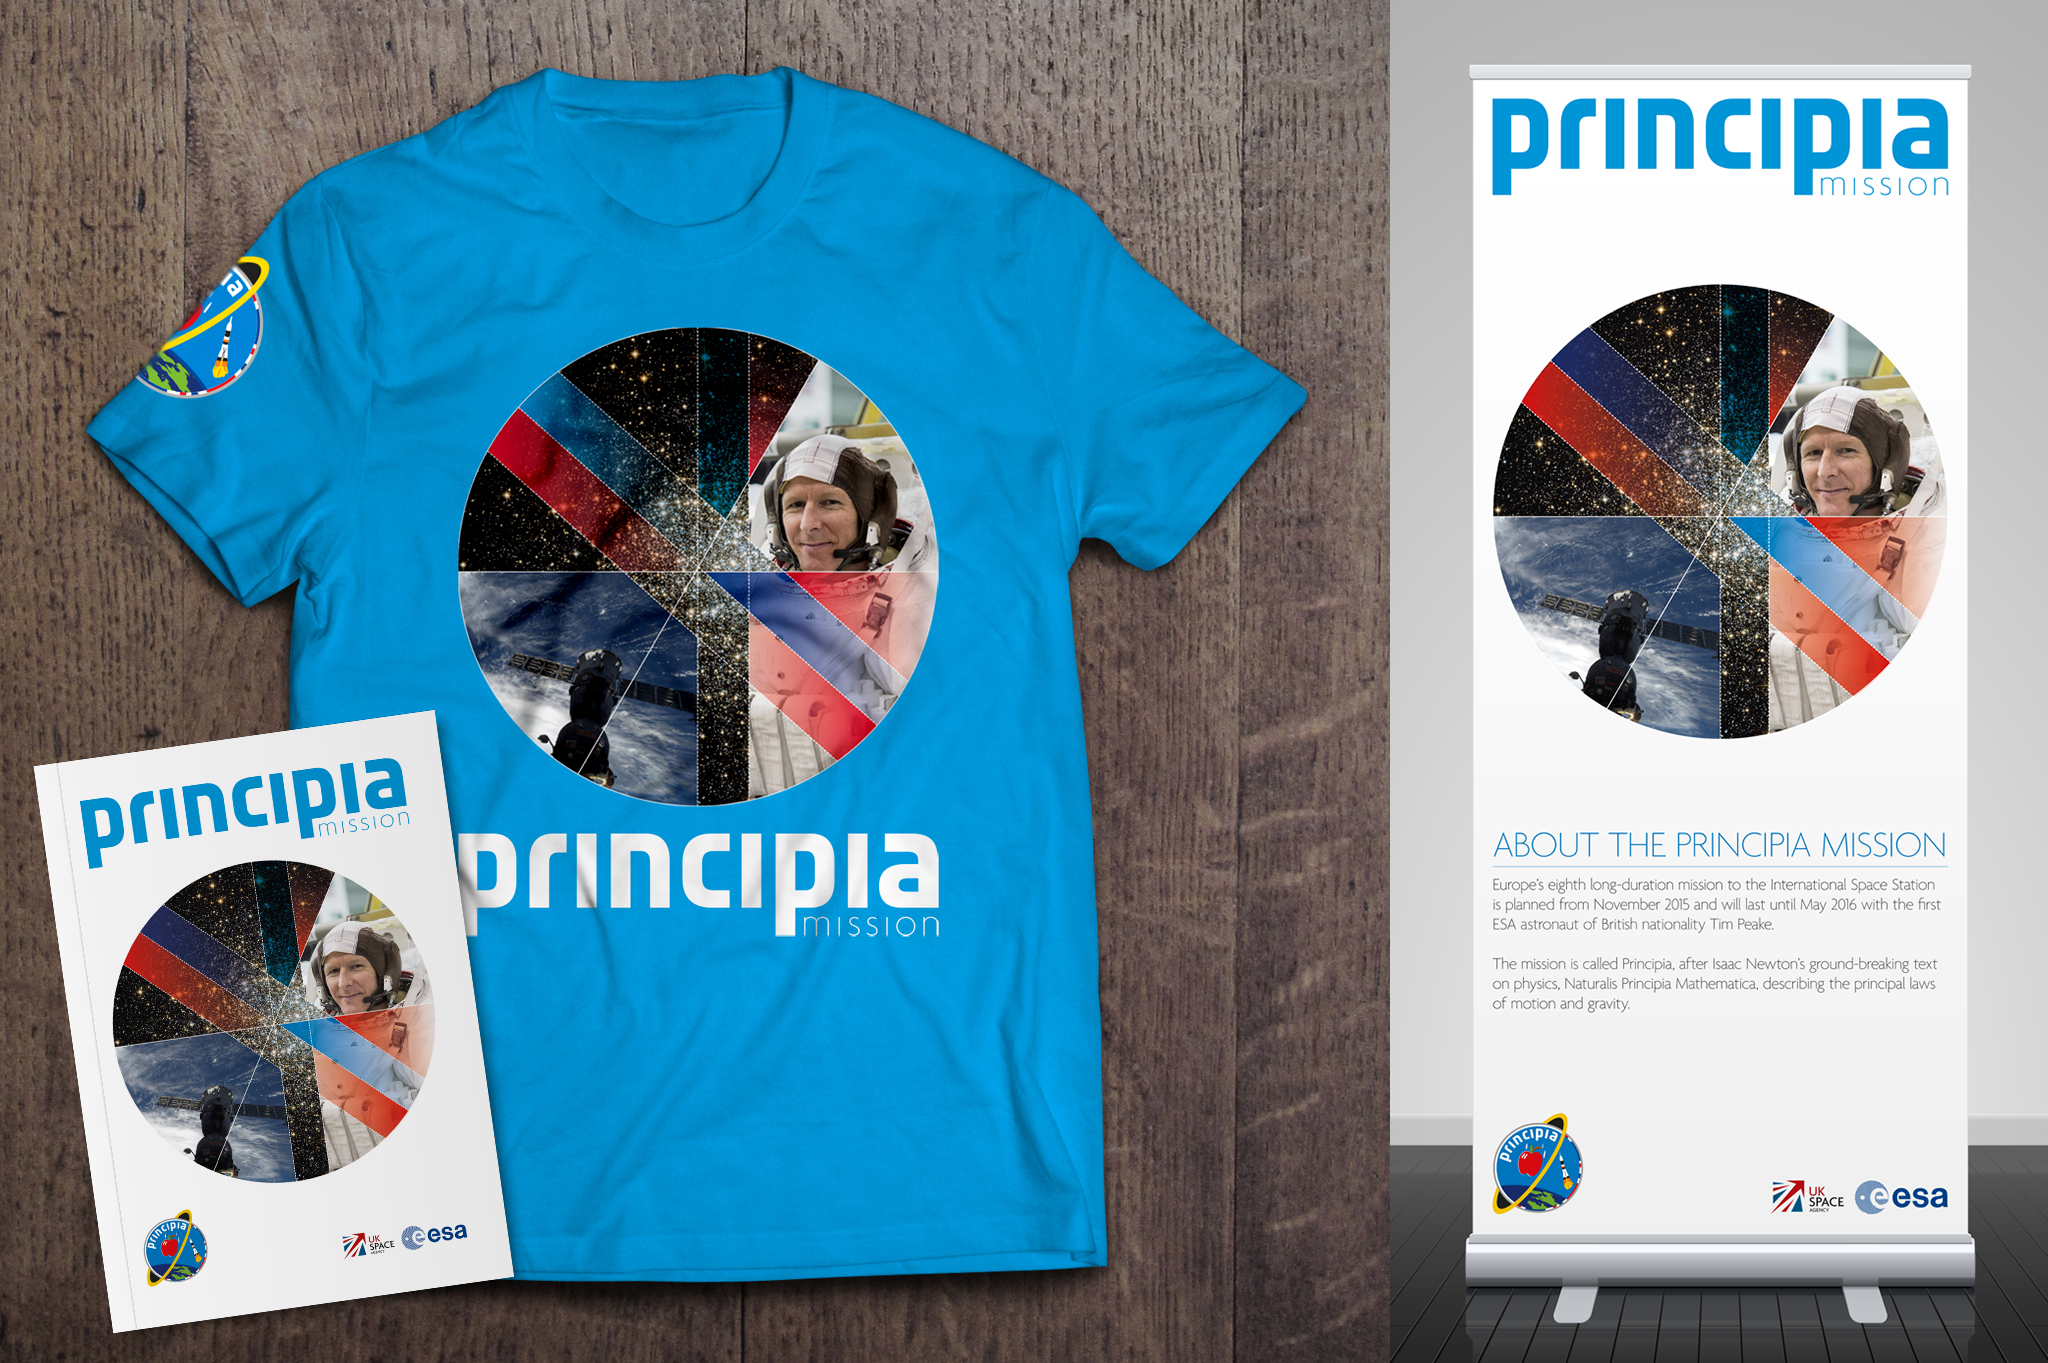 Principia branding on a t-shirt, brochure and pull up banner